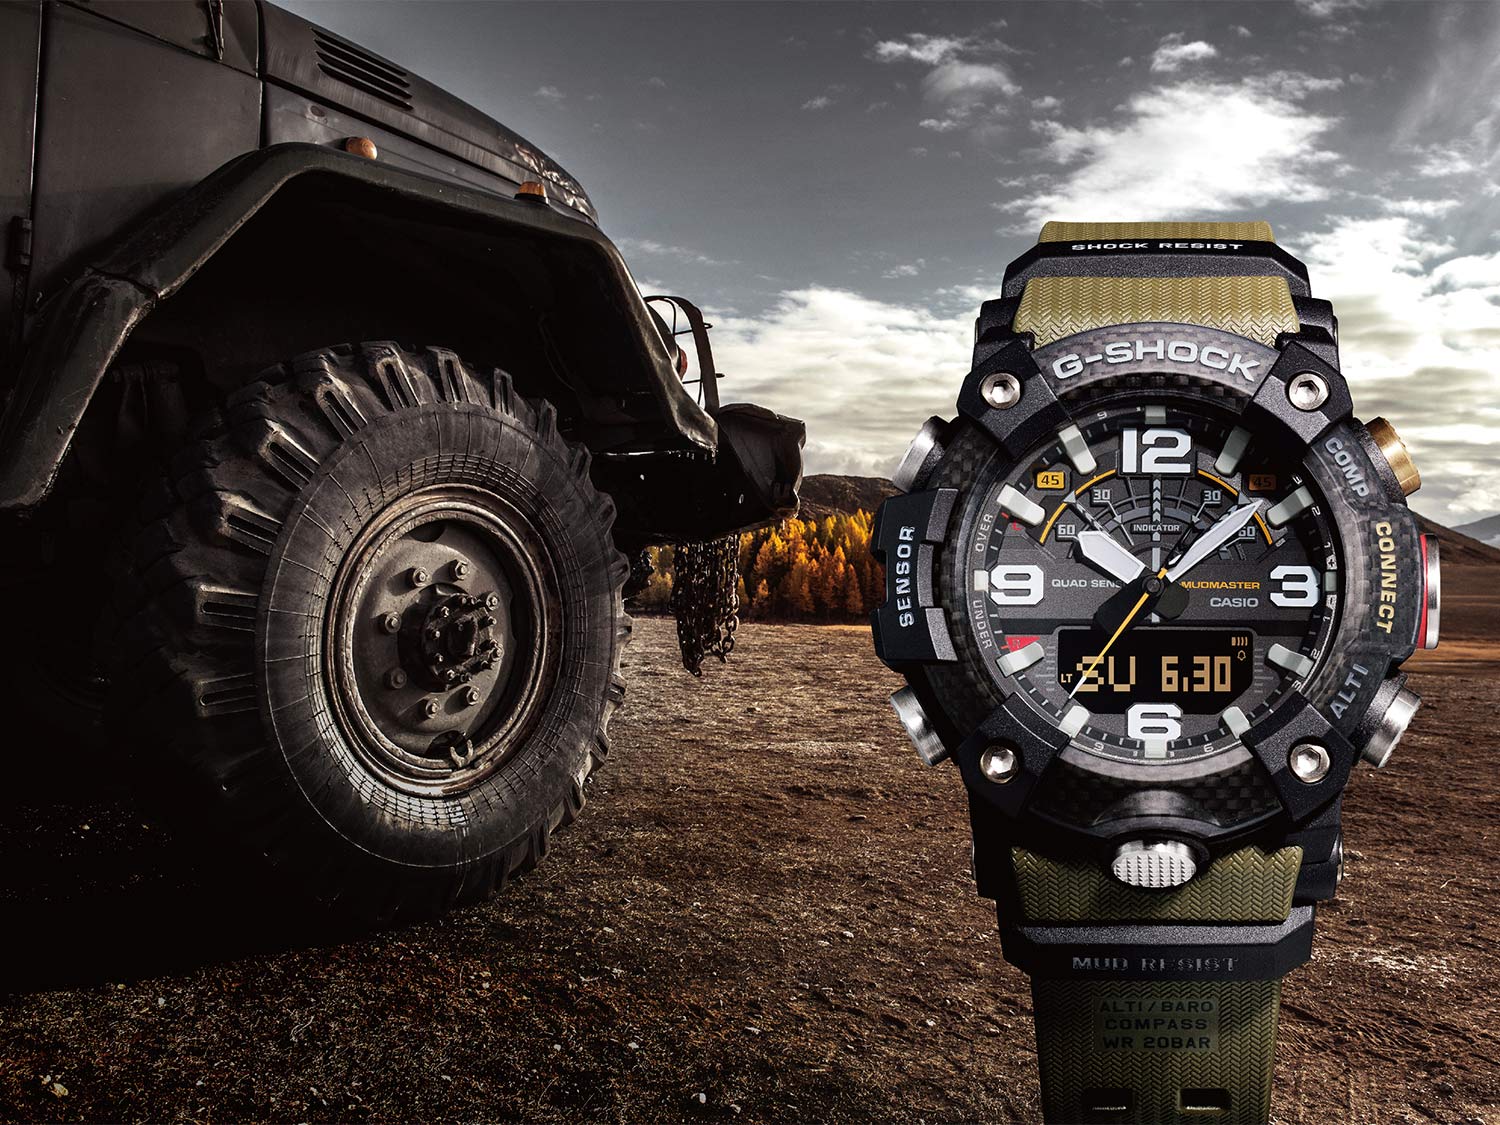 The G-SHOCK Mudmaster GG-B100 Watch is Perfect for Hunters and Anglers